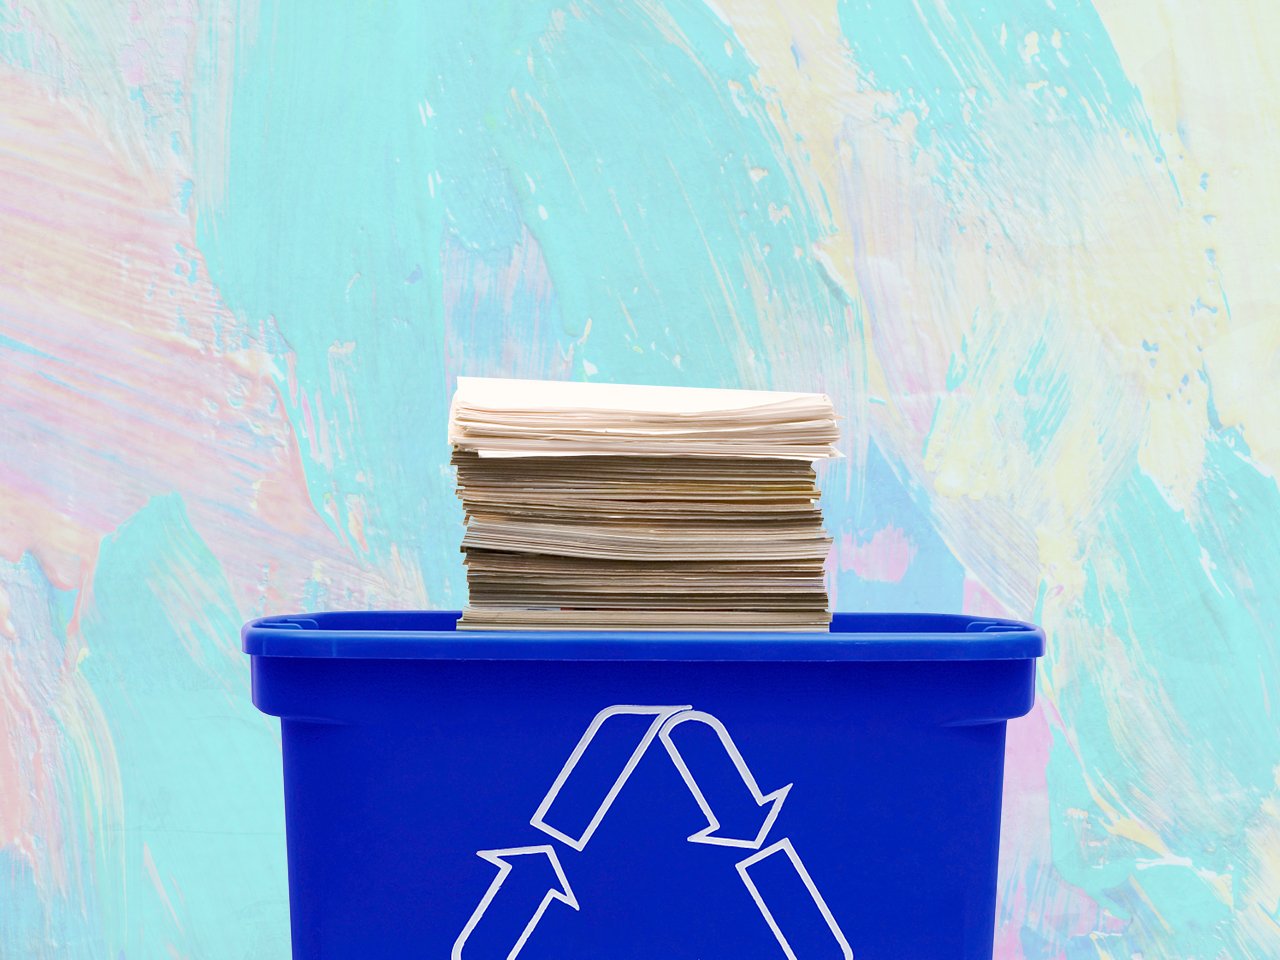 Recycling blue bin with stack of paper